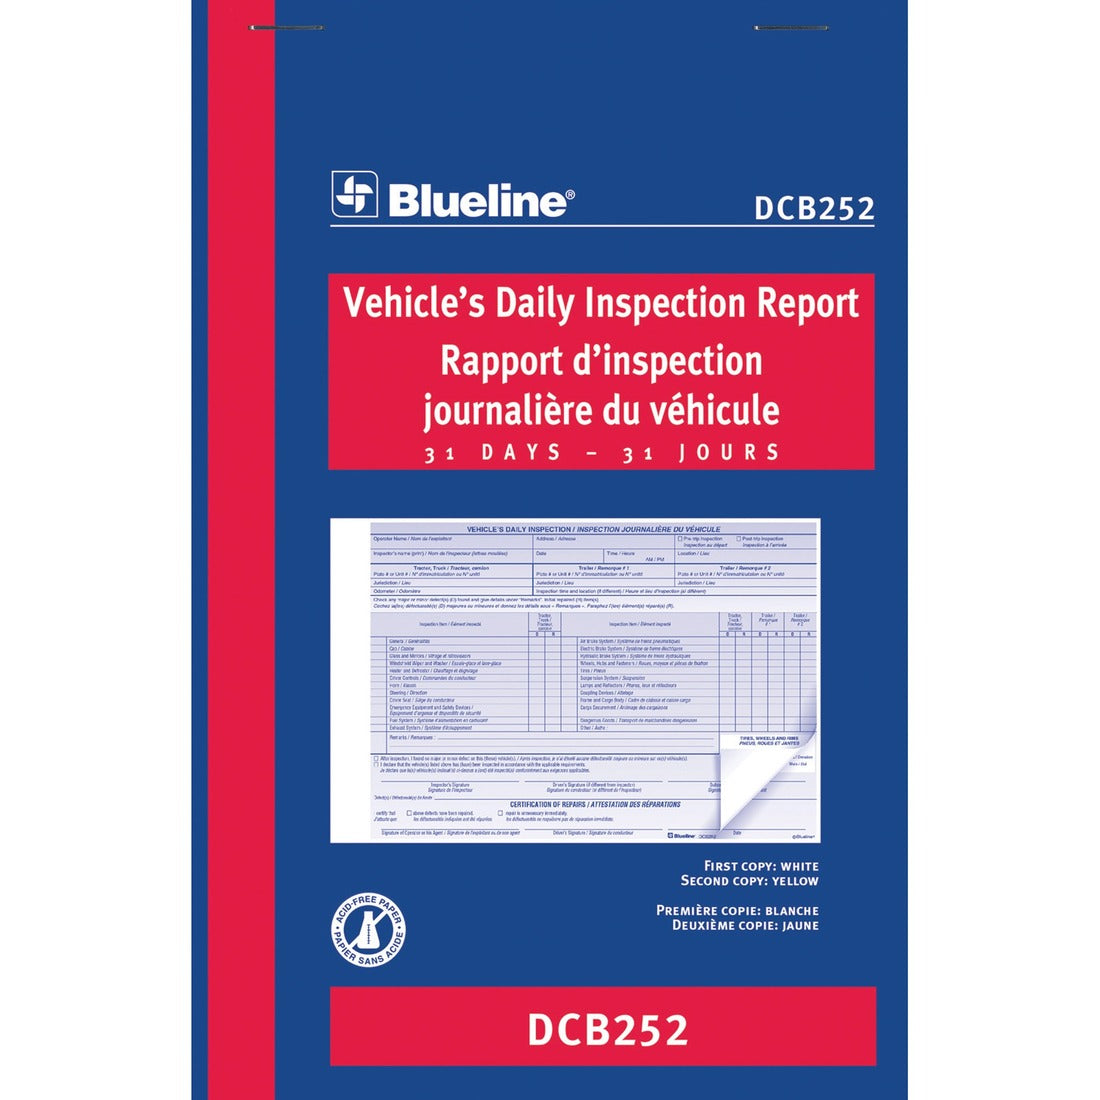 Blueline Vehicle's Daily Inspection Report